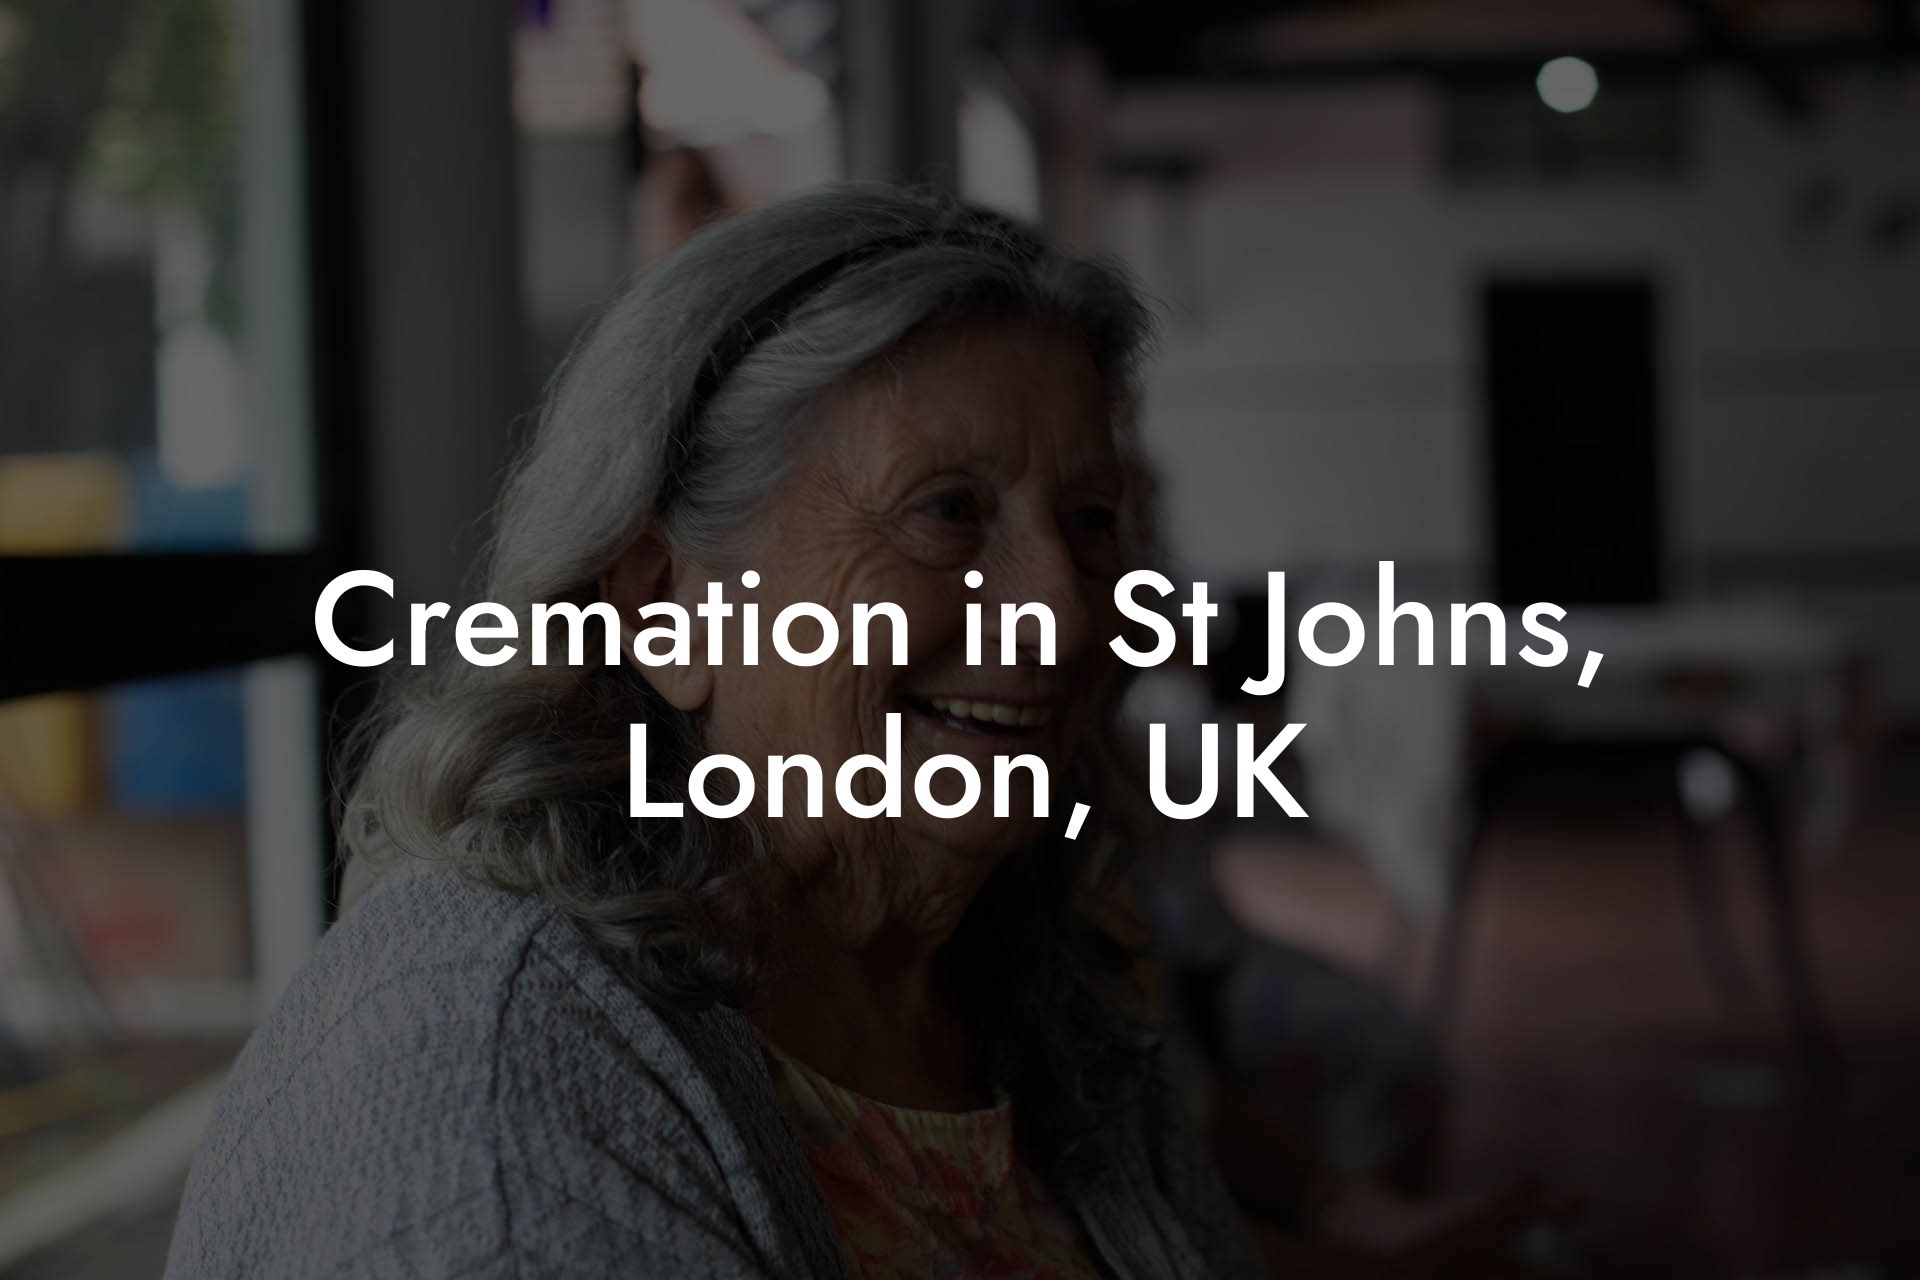 Cremation in St Johns, London, UK